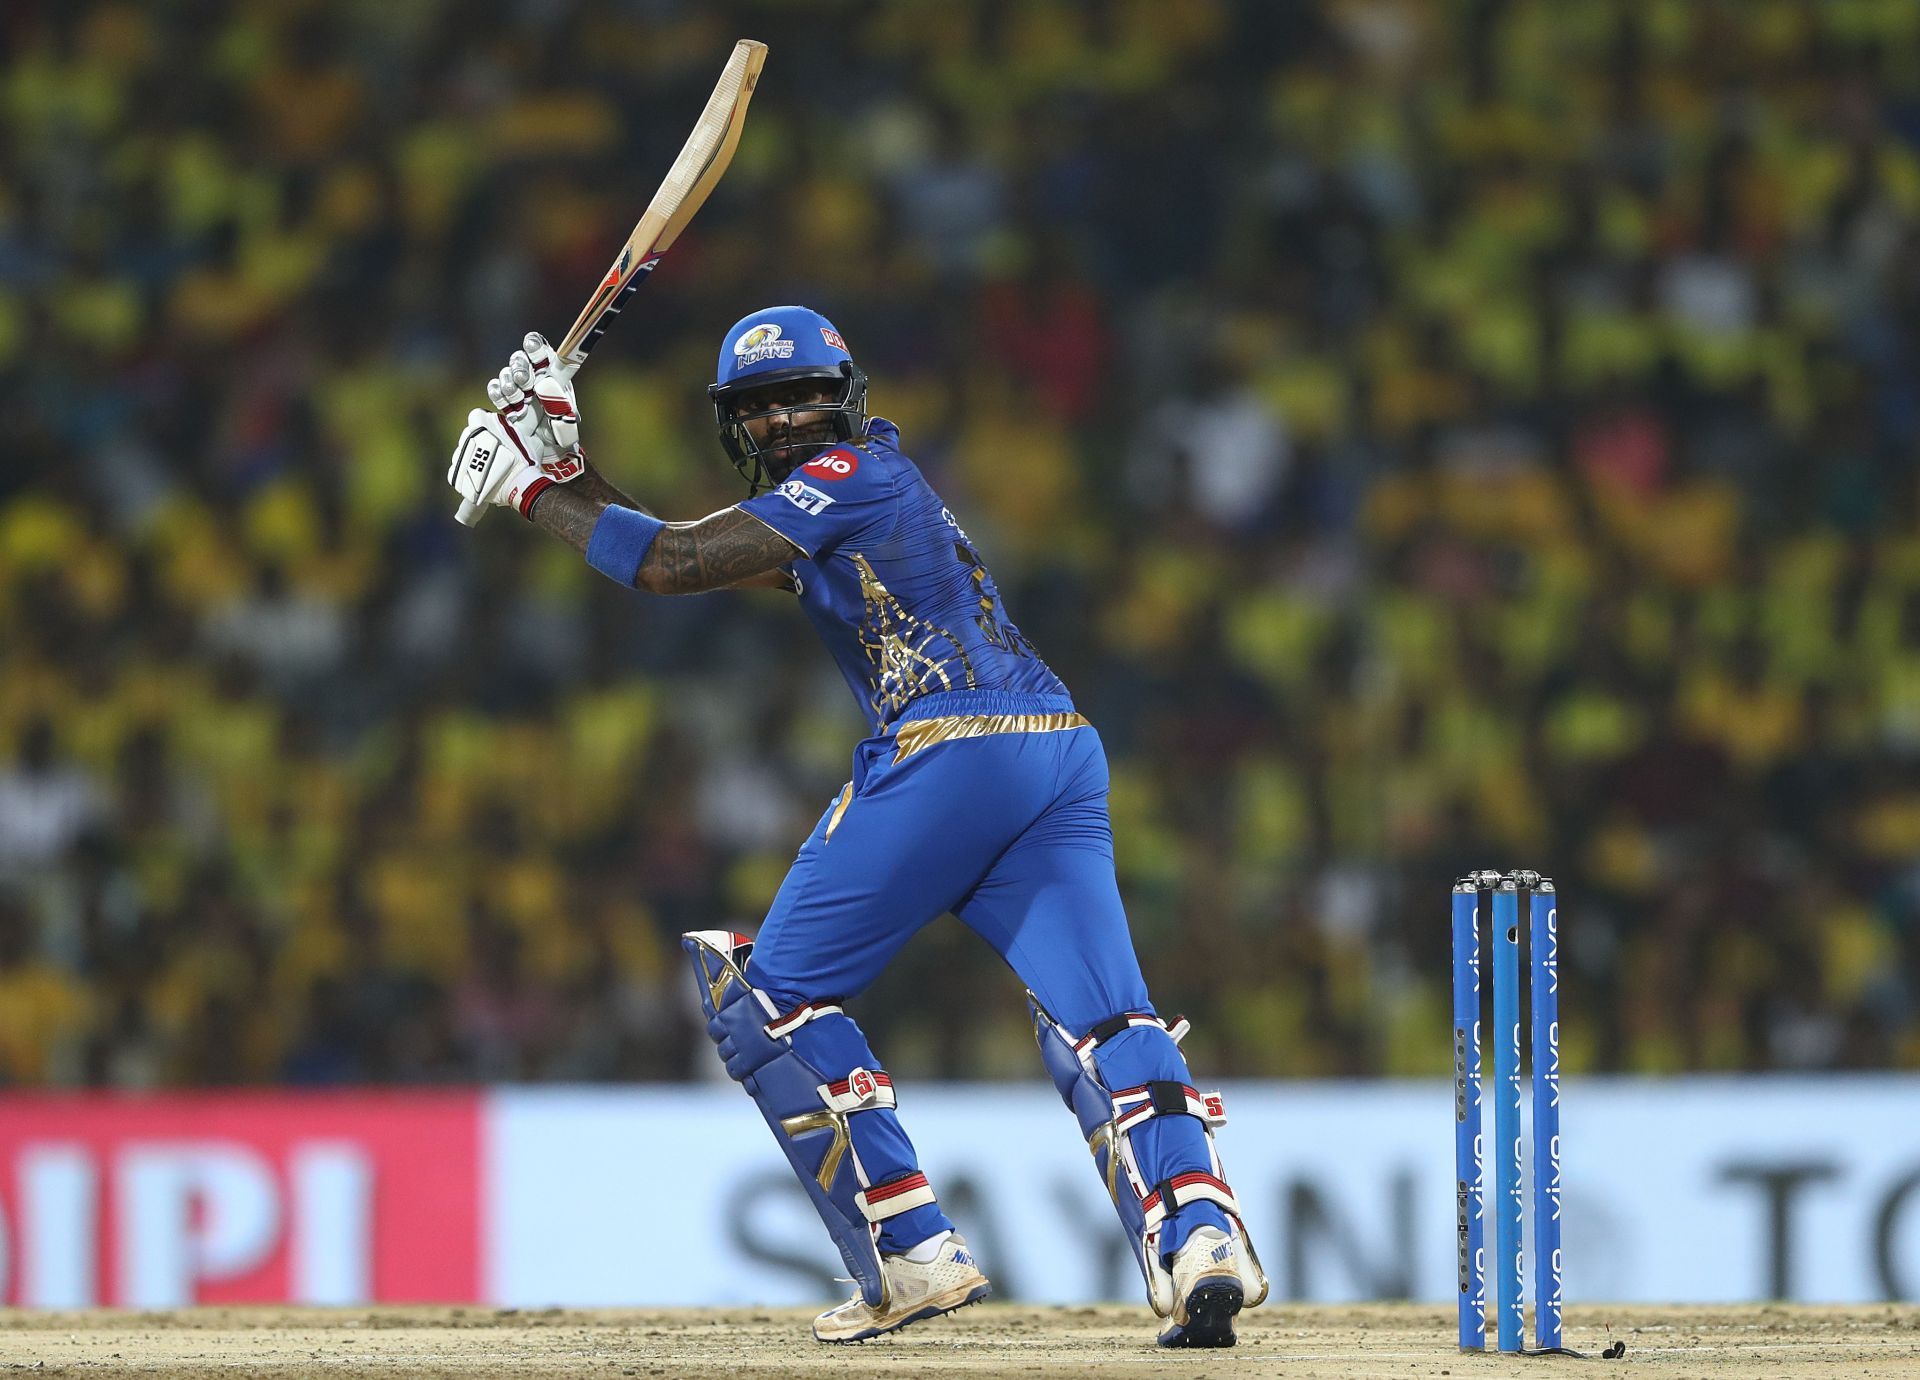 Suryakumar Yadav will be an automatic choice for Mumbai Indians once fit